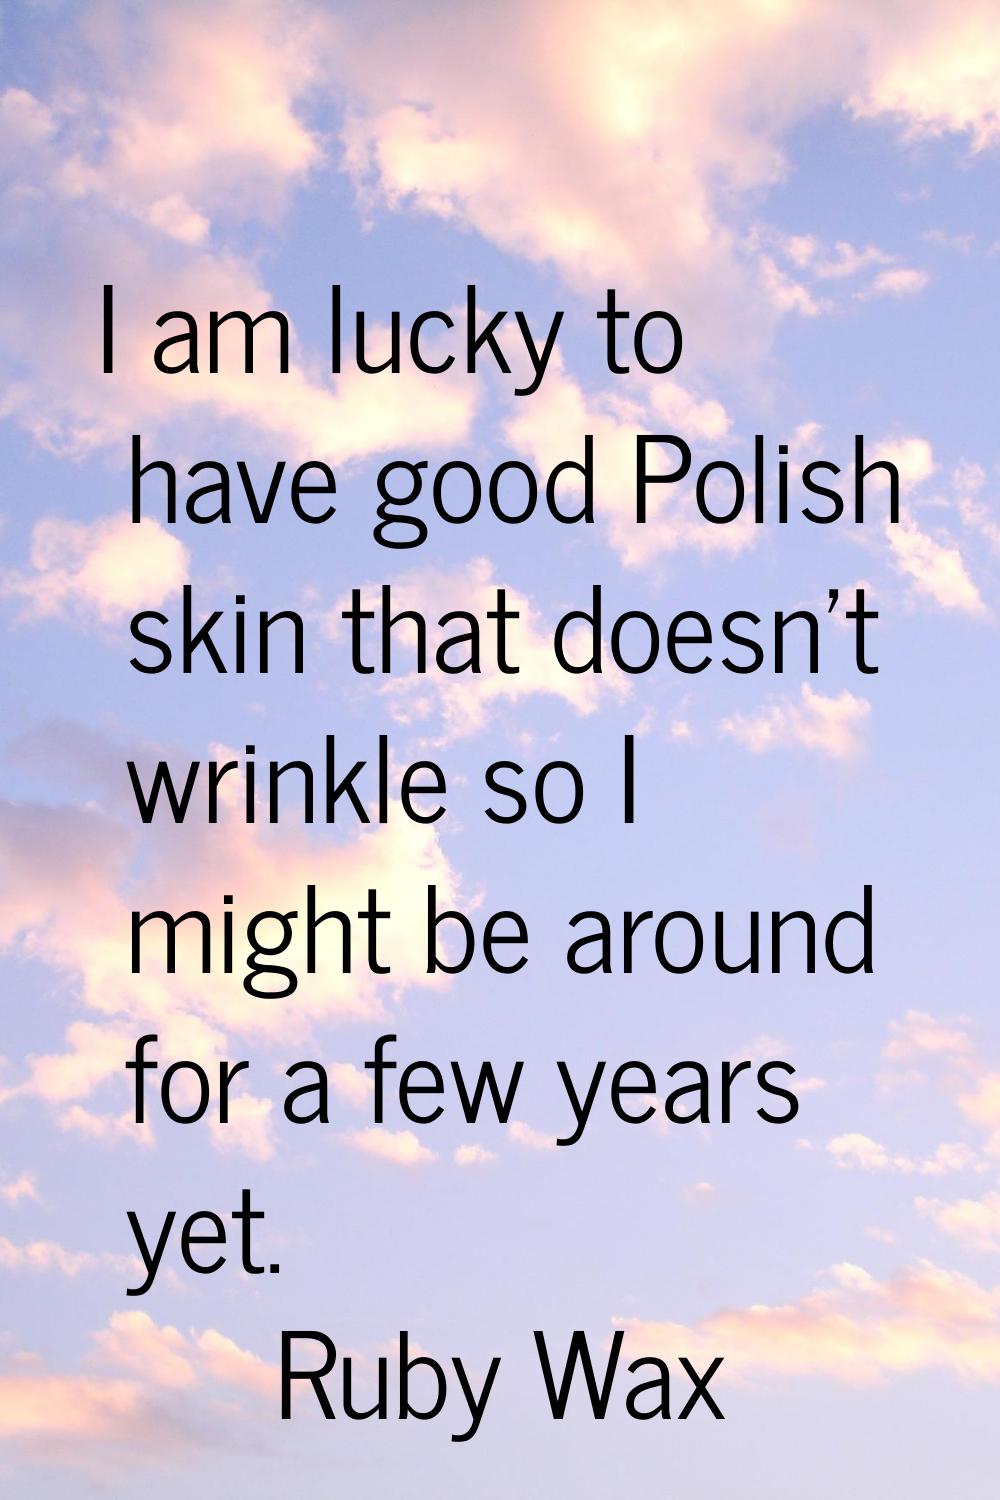 I am lucky to have good Polish skin that doesn't wrinkle so I might be around for a few years yet.